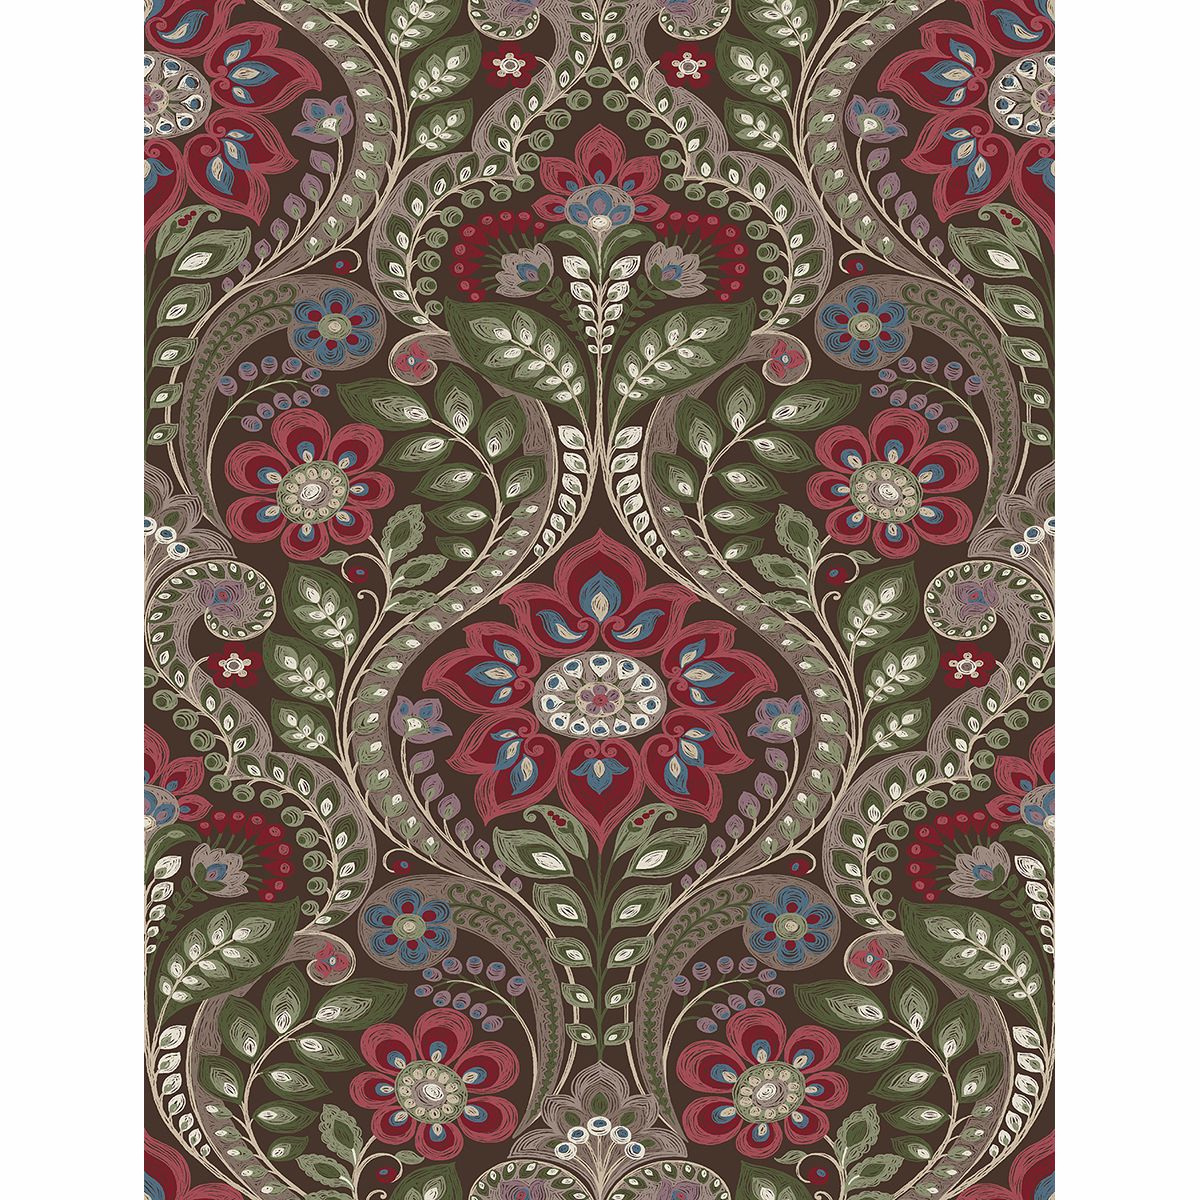 2763-12105 - Damask Chocolate Night Bloom - by A-Street Prints